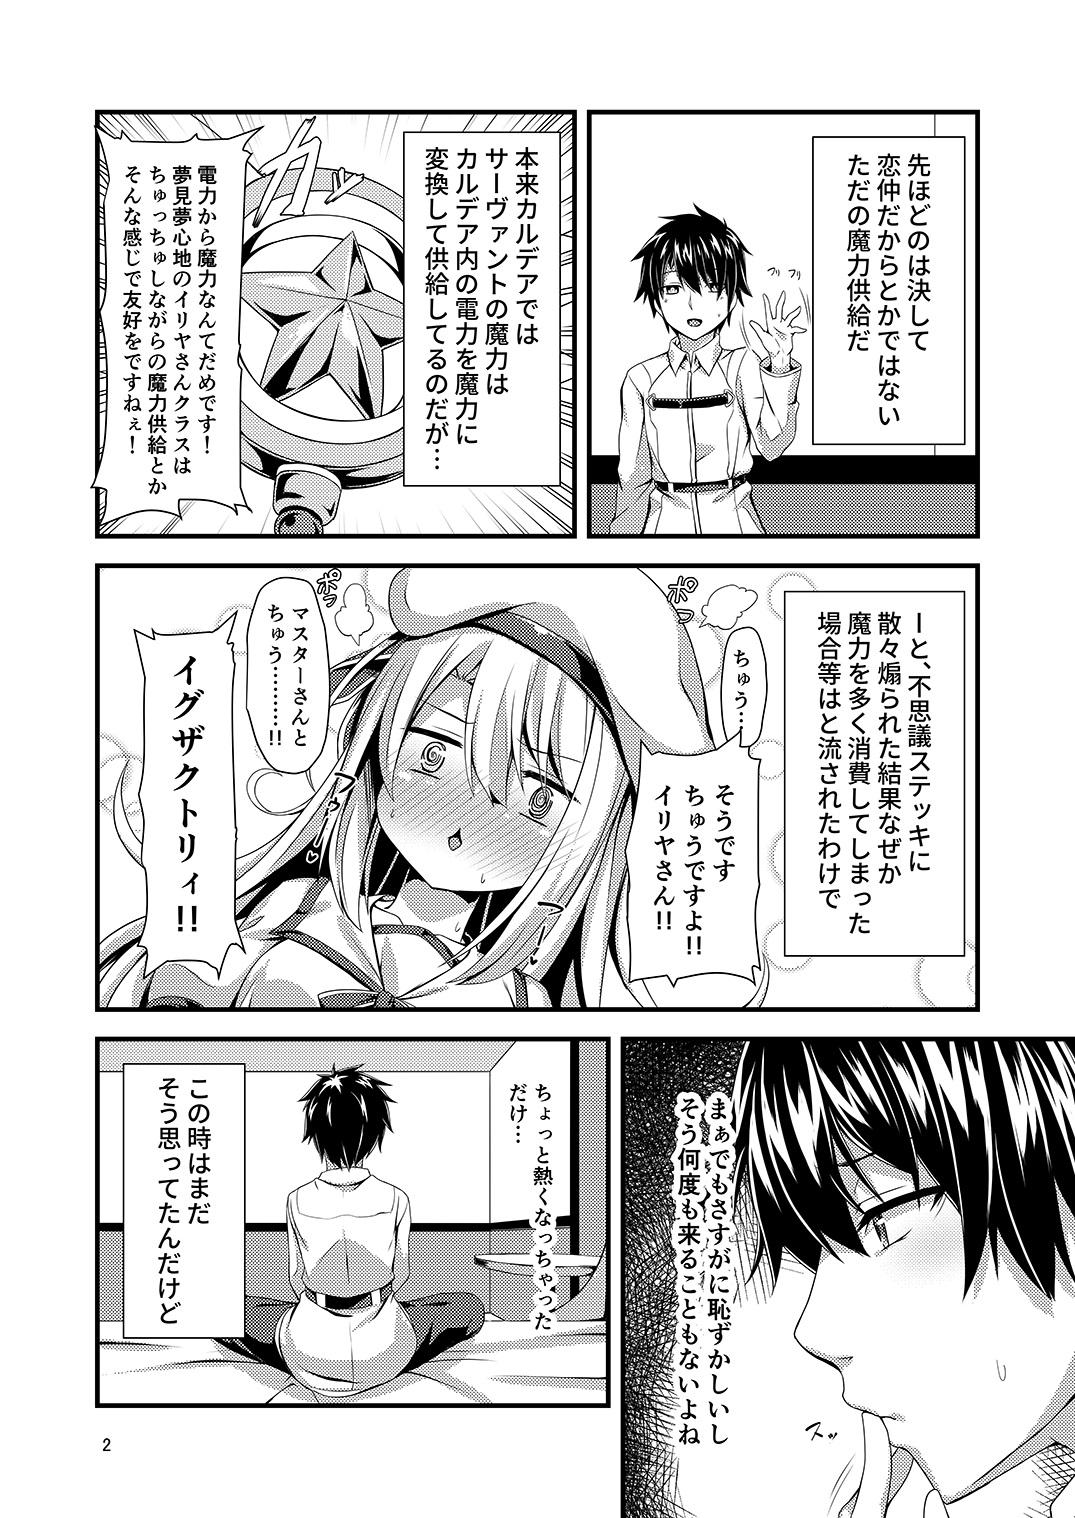 Consolo Ama Love Illya - Fate grand order Fate kaleid liner prisma illya Seduction - Page 4